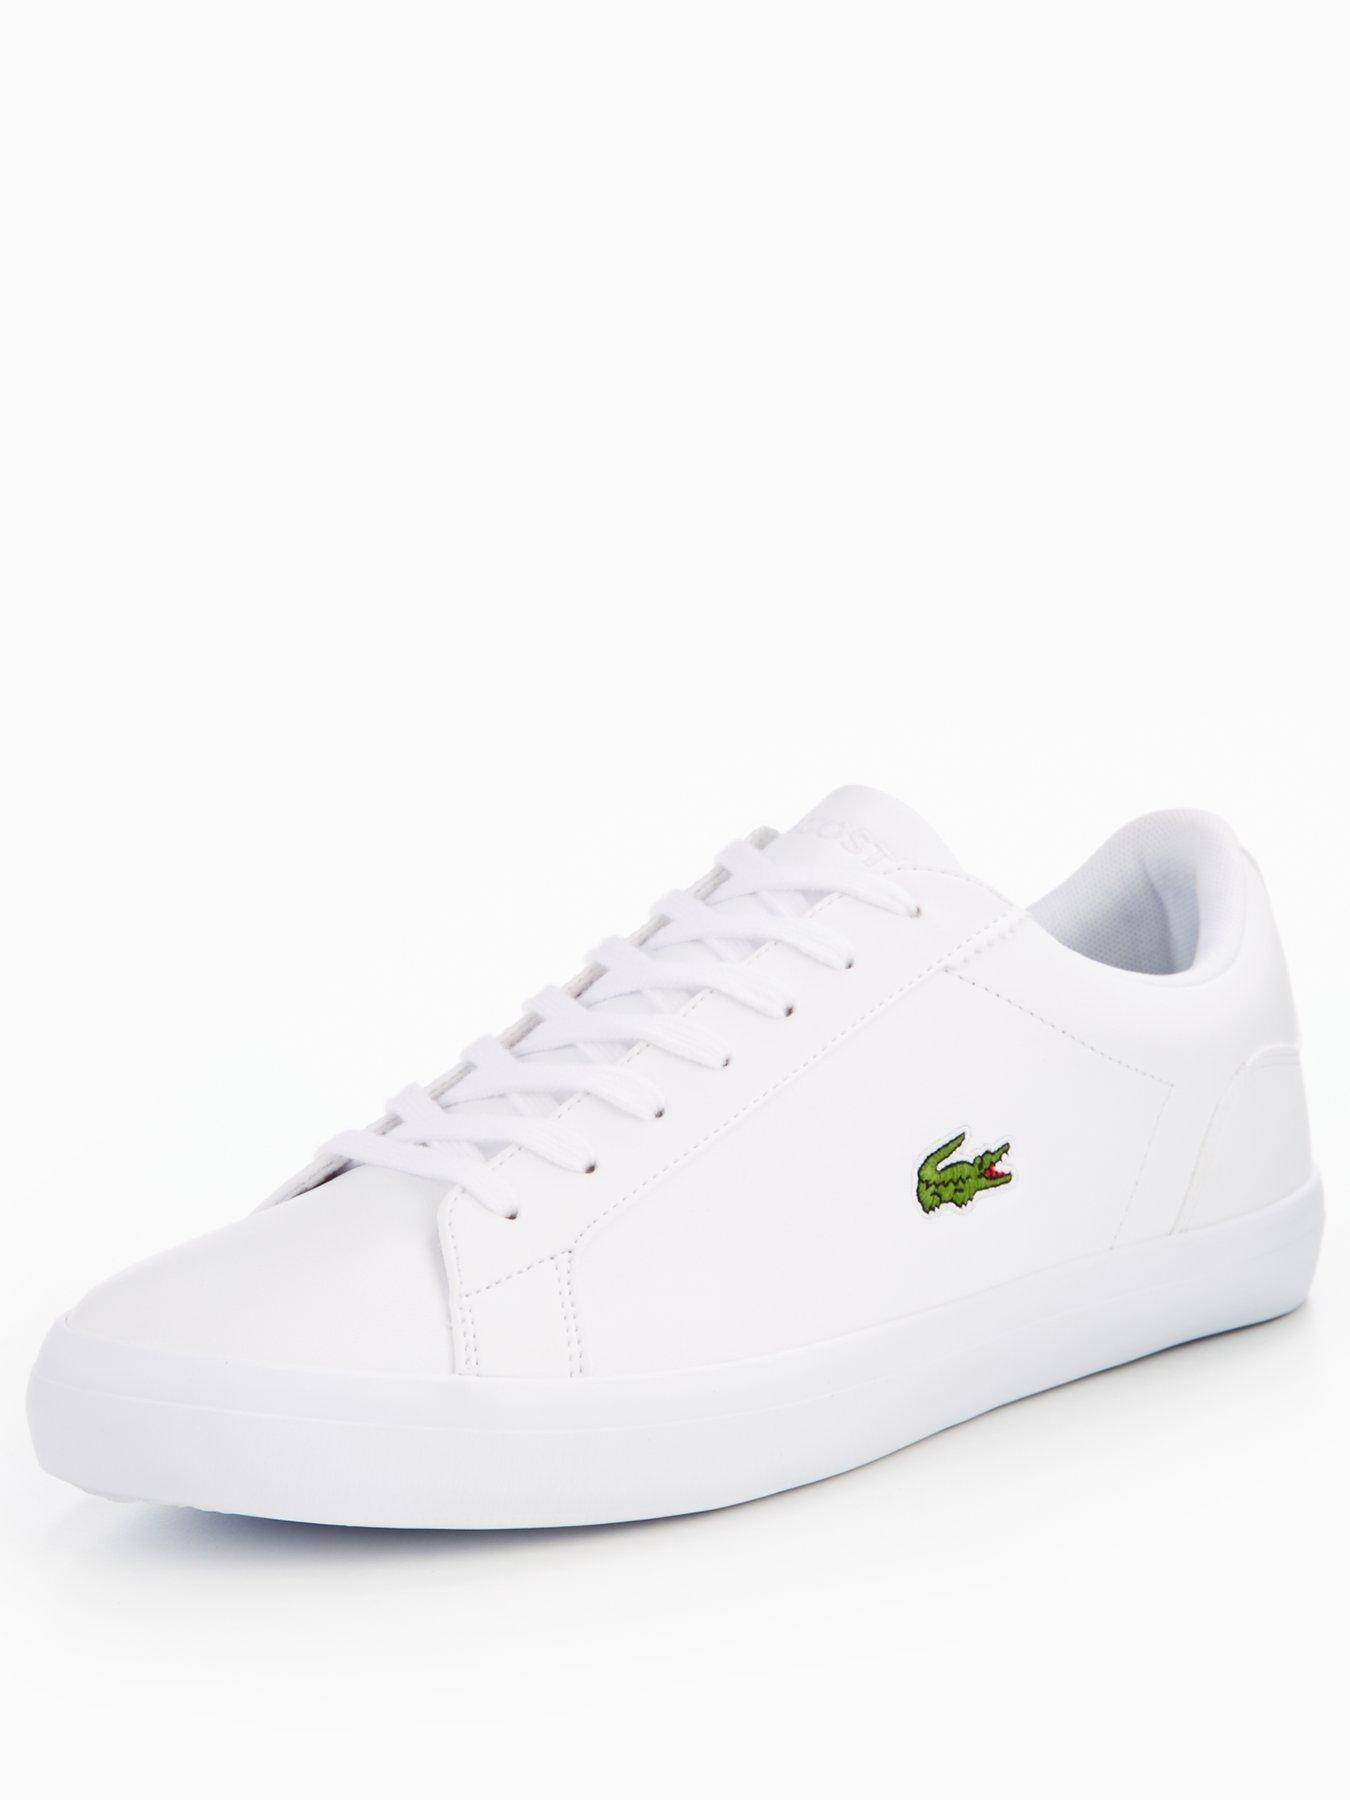 Lacoste Lerond Trainers - White 